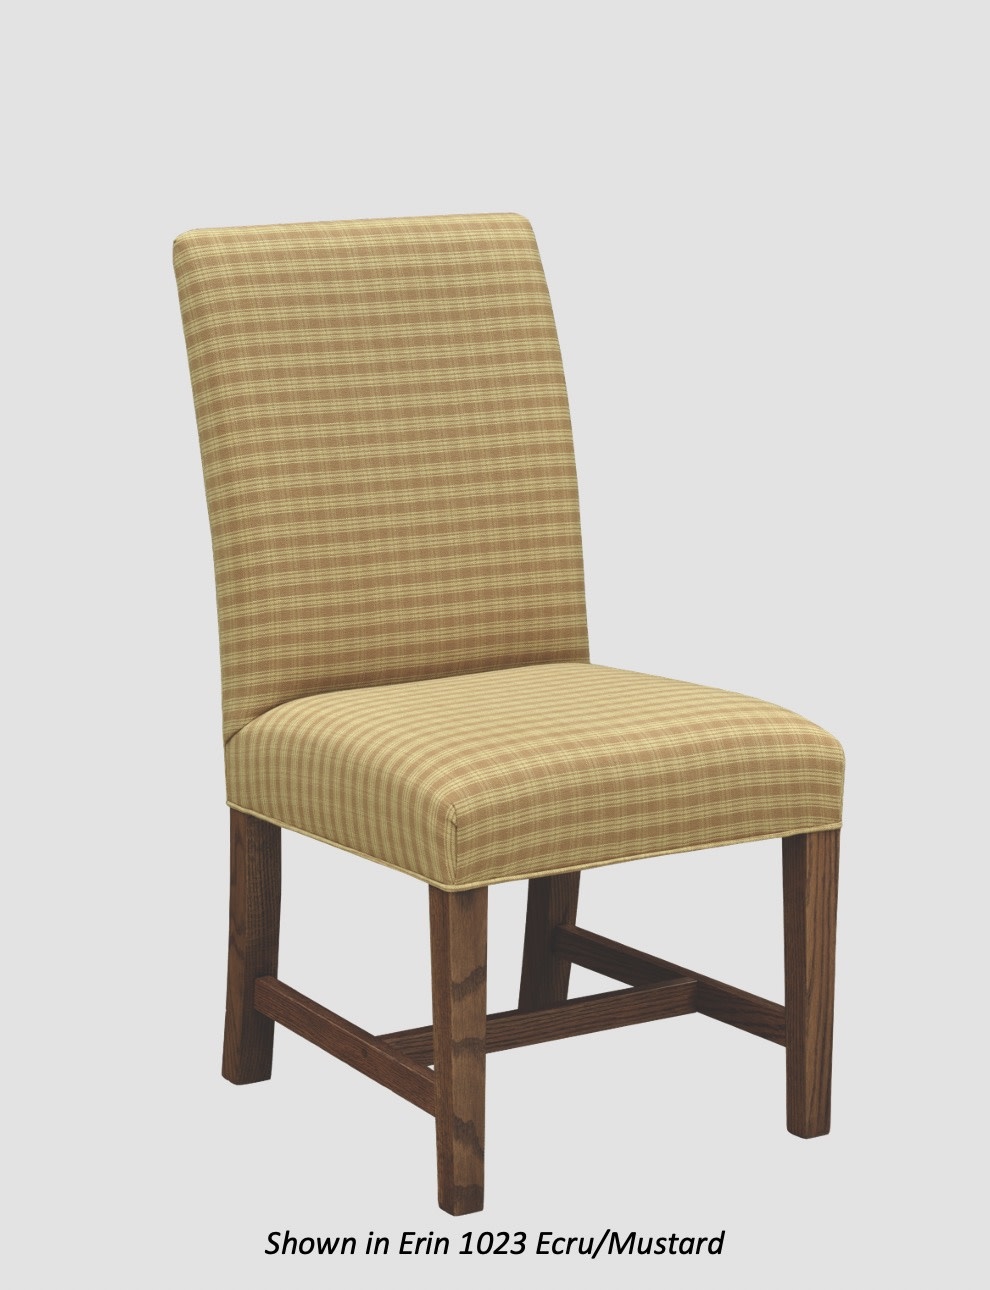 Town & Country Furnishings Lincoln Dining Chair with Low Back Straight Top Brand: Town & Country Furnishings